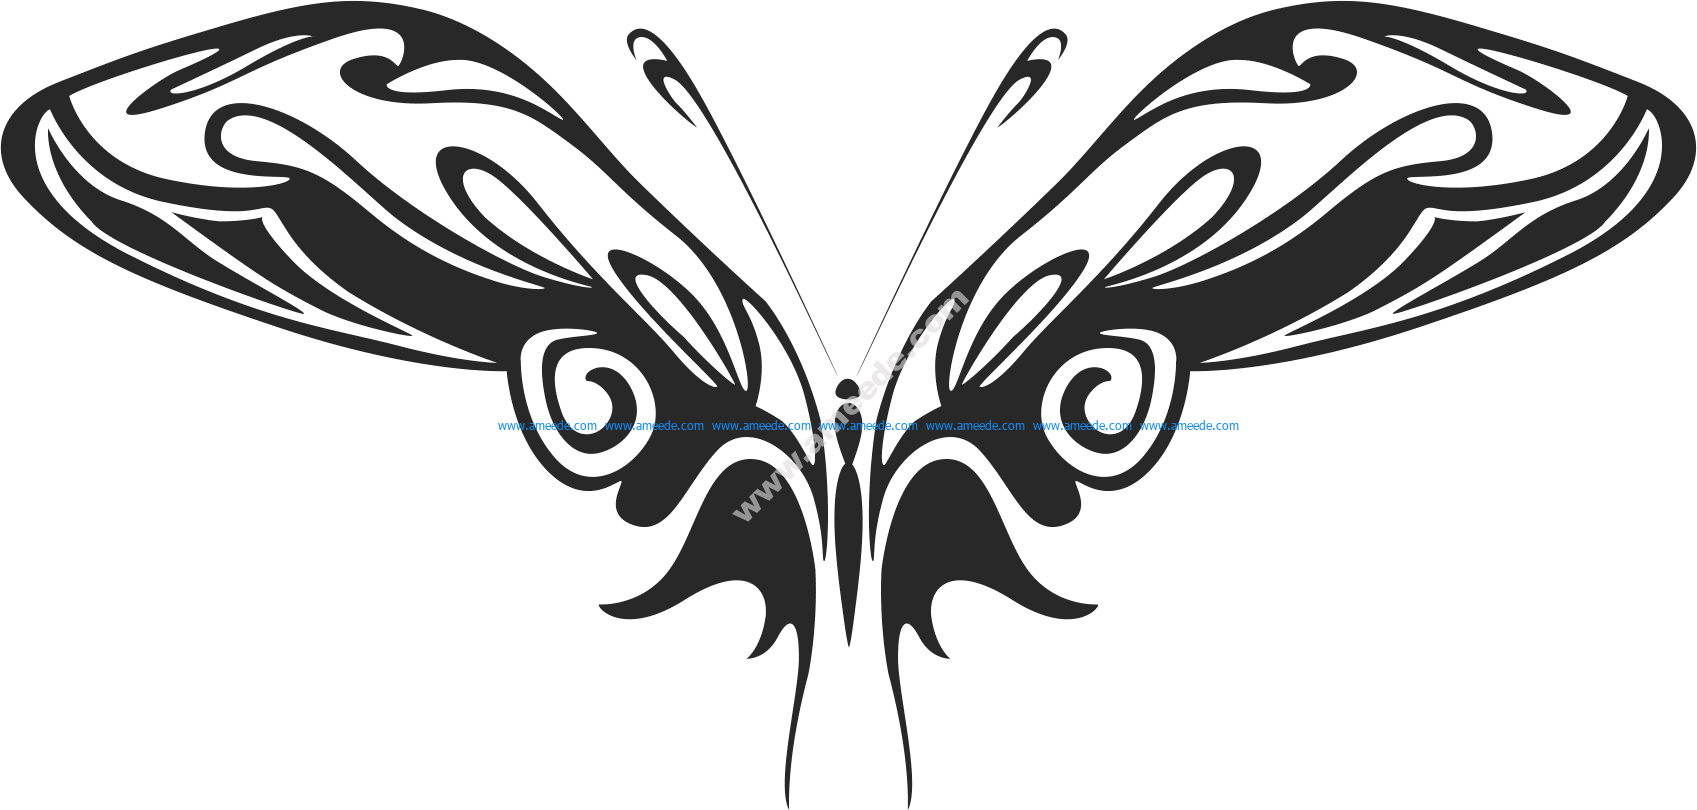 Download Tribal Butterfly Vector Art 15 - Download Free Vector